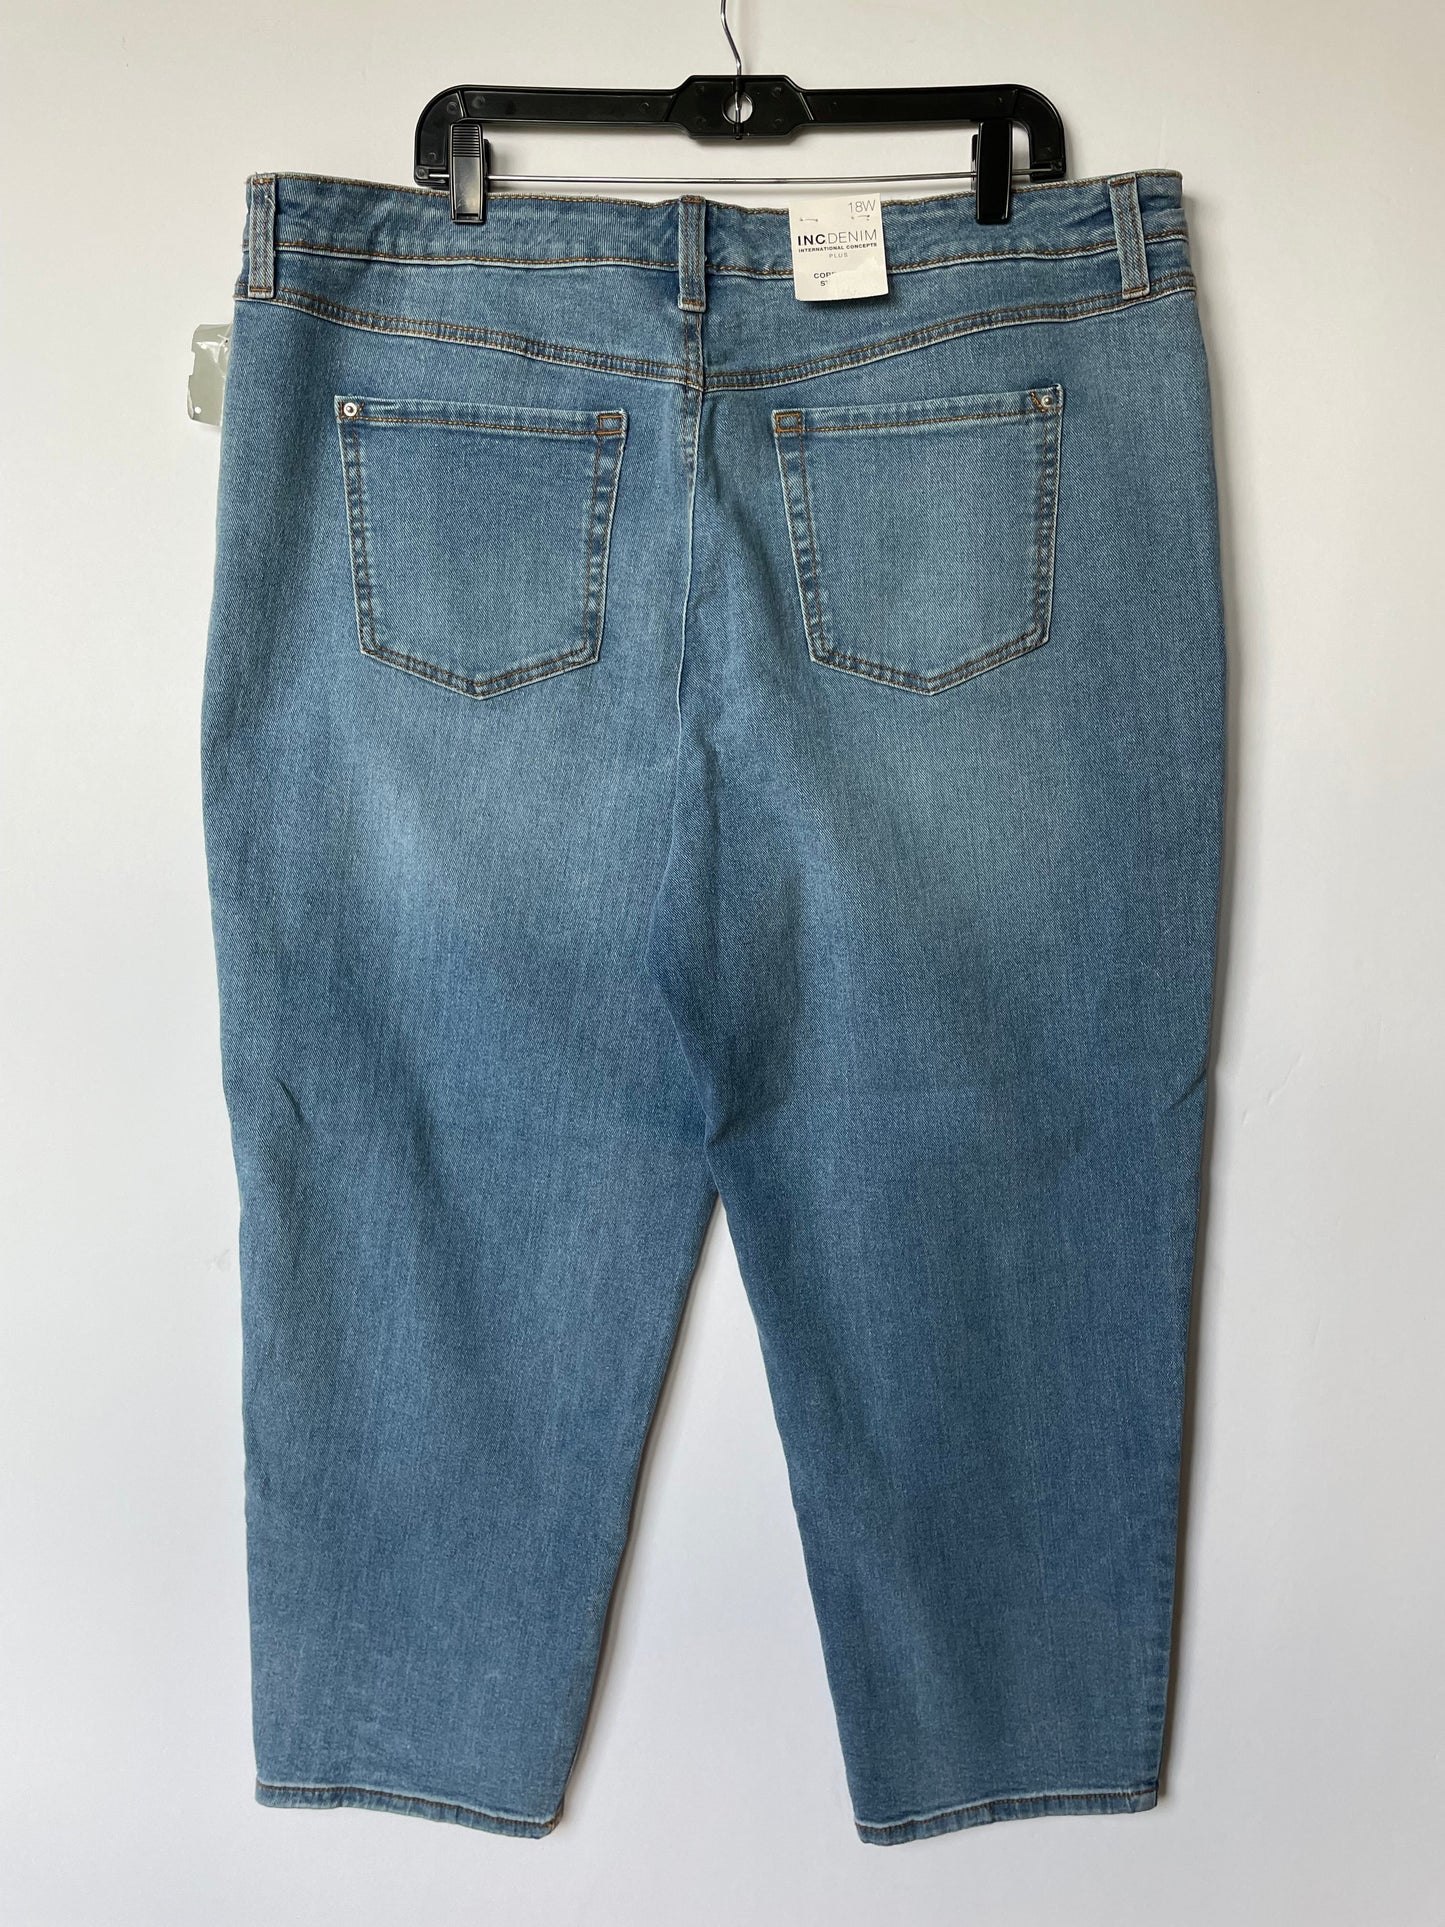 Jeans Relaxed/boyfriend By Inc  Size: 18